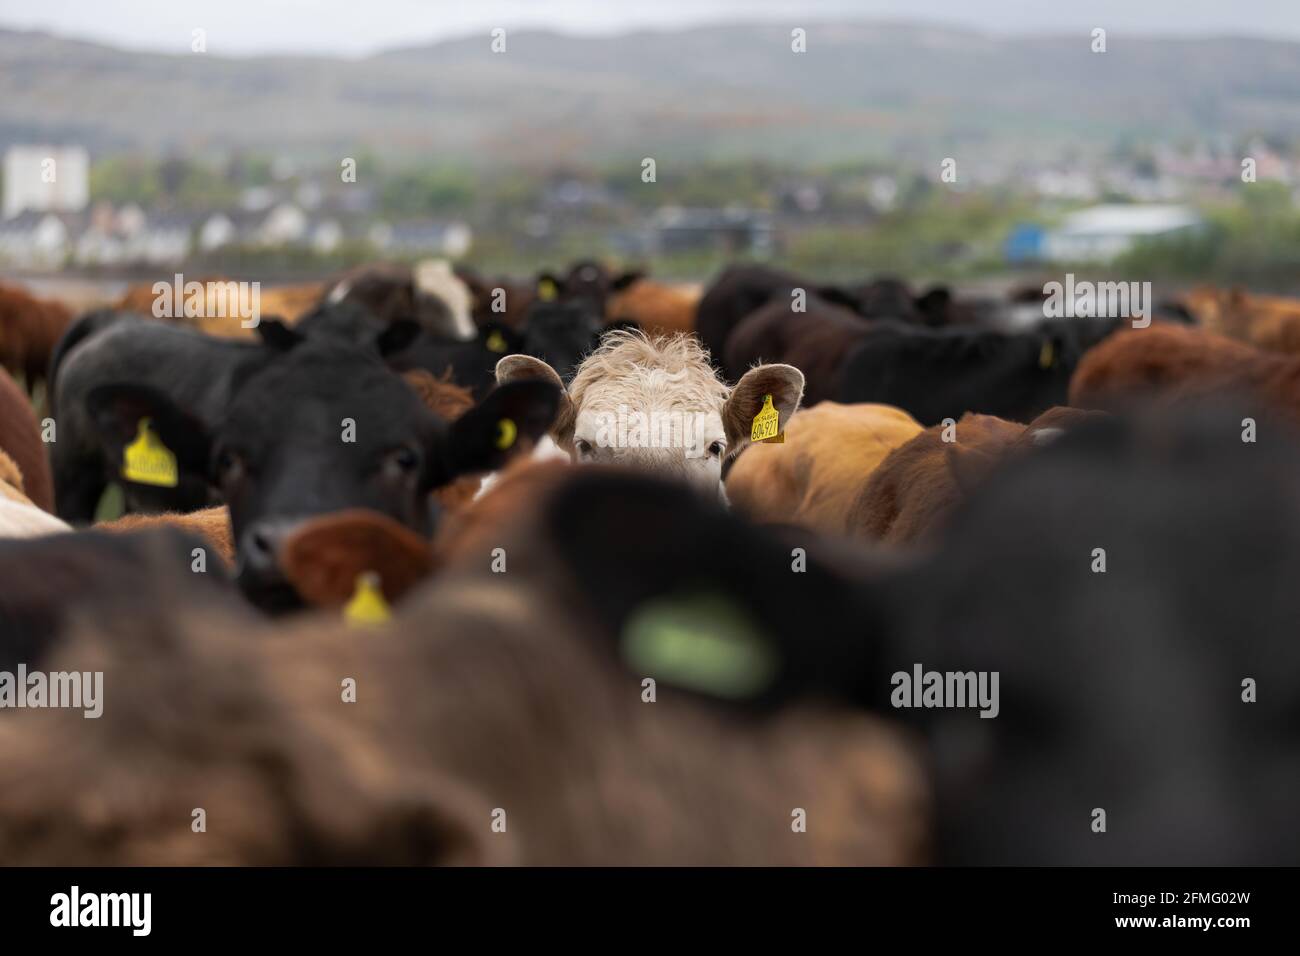 A cow surrounded by cows Stock Photo